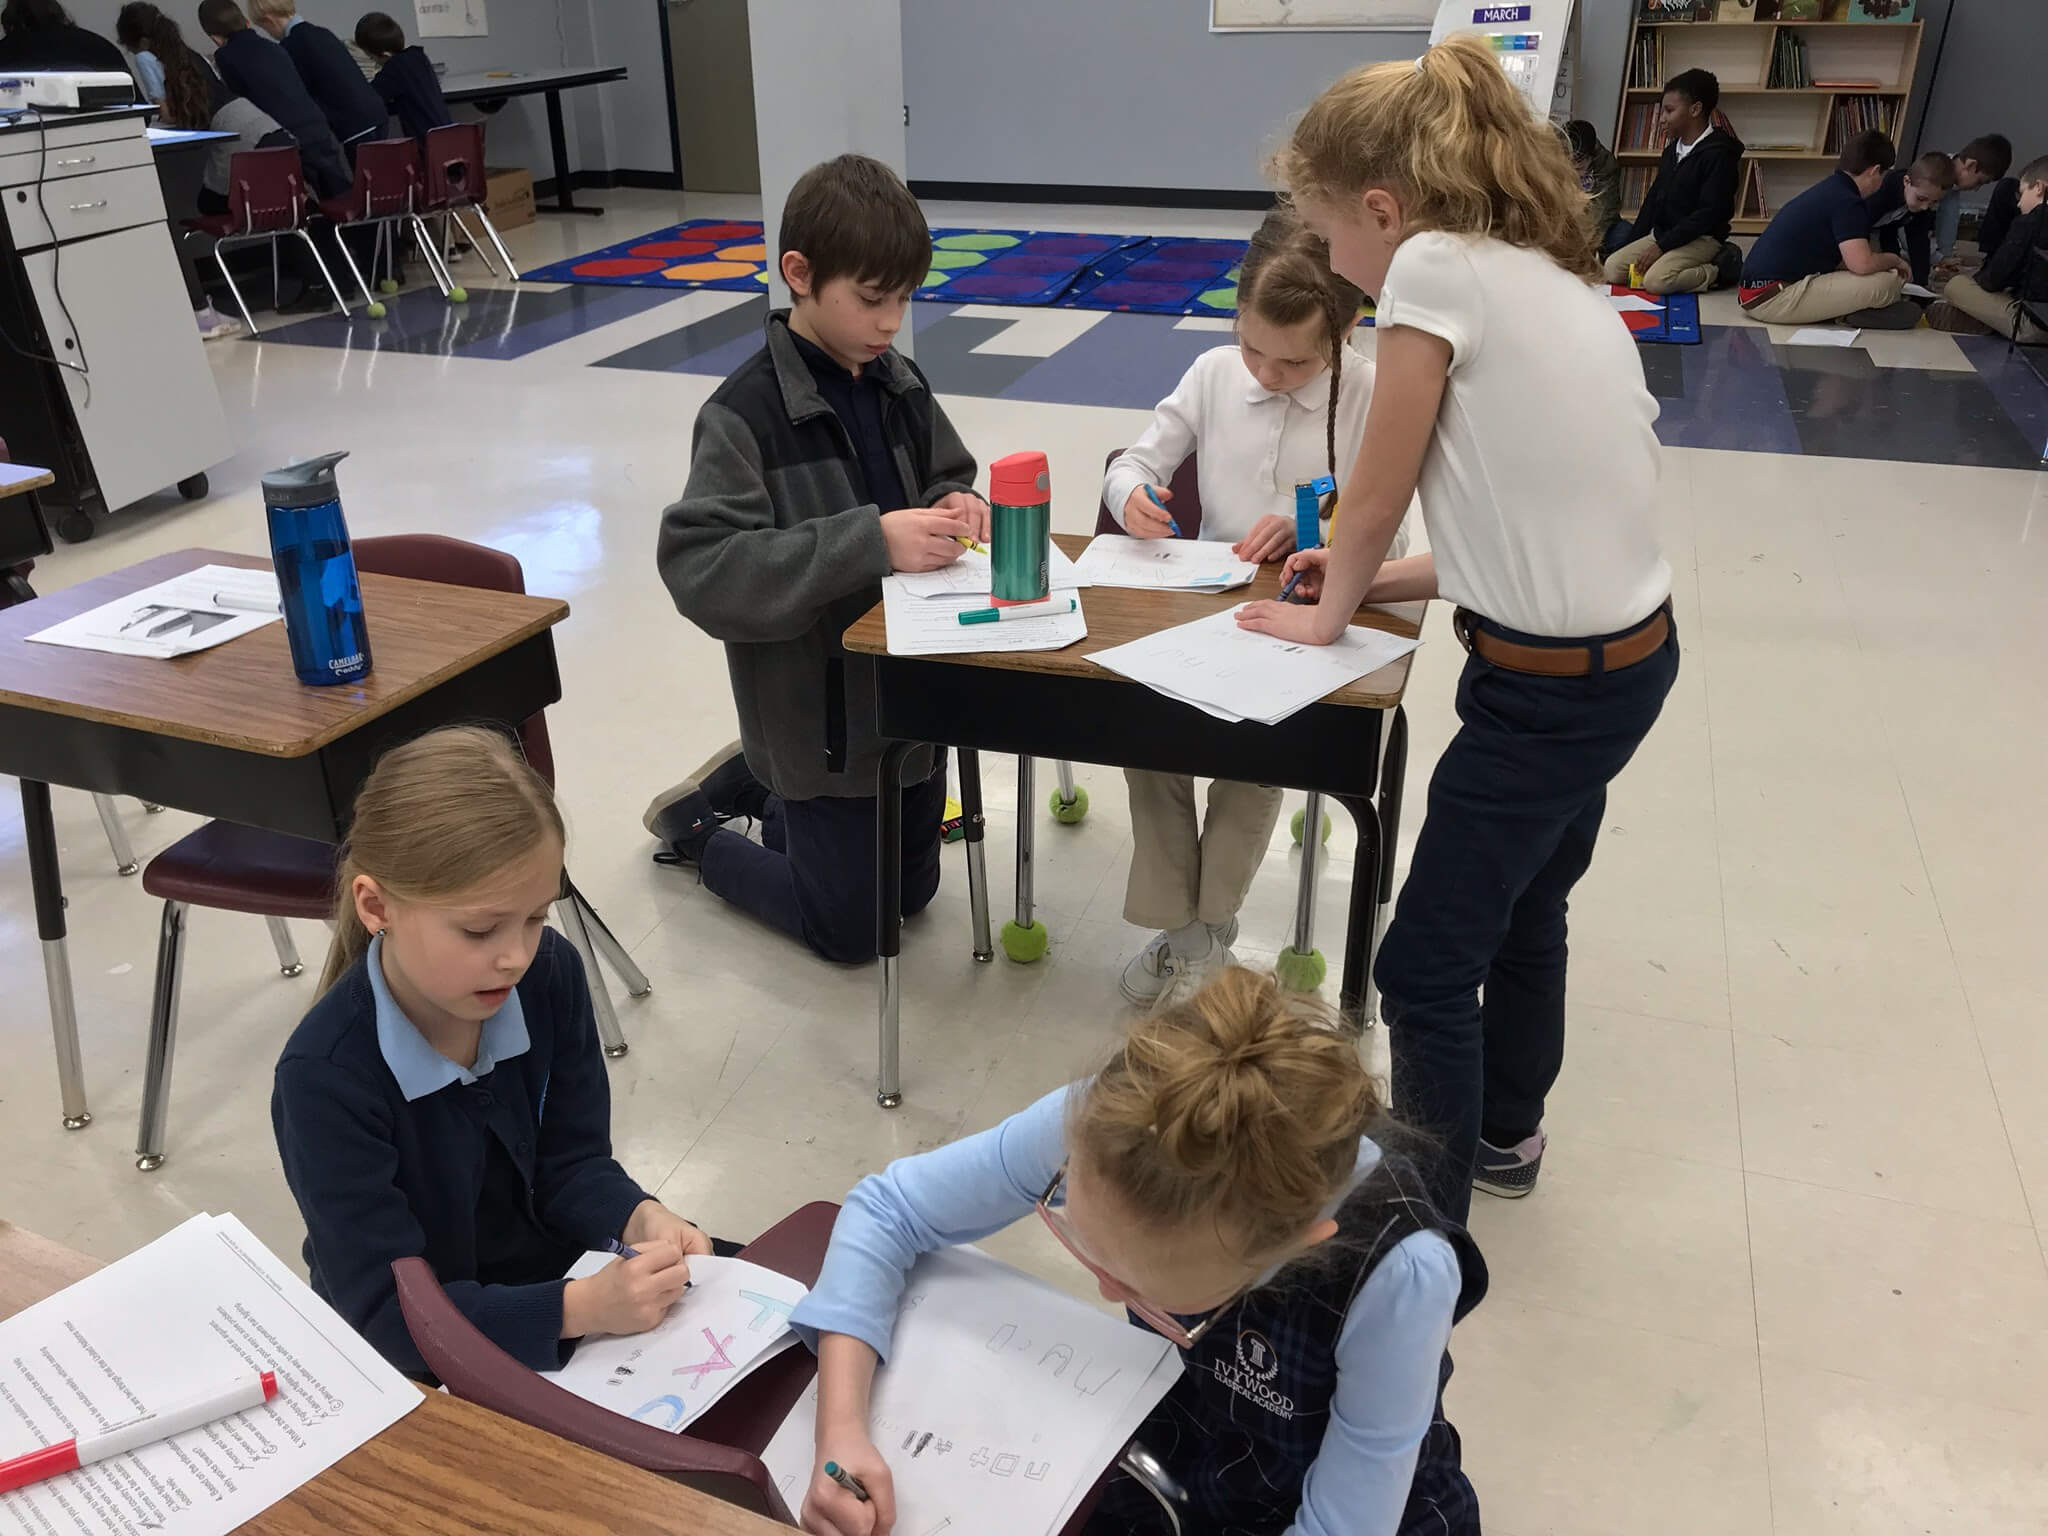 Fifth grade students helped the second grade students color cytoplasm, nuclei, and cell membranes in animal cells and chloroplasts, cell walls, and vacuoles in eukaryotic plant cells with crayons.